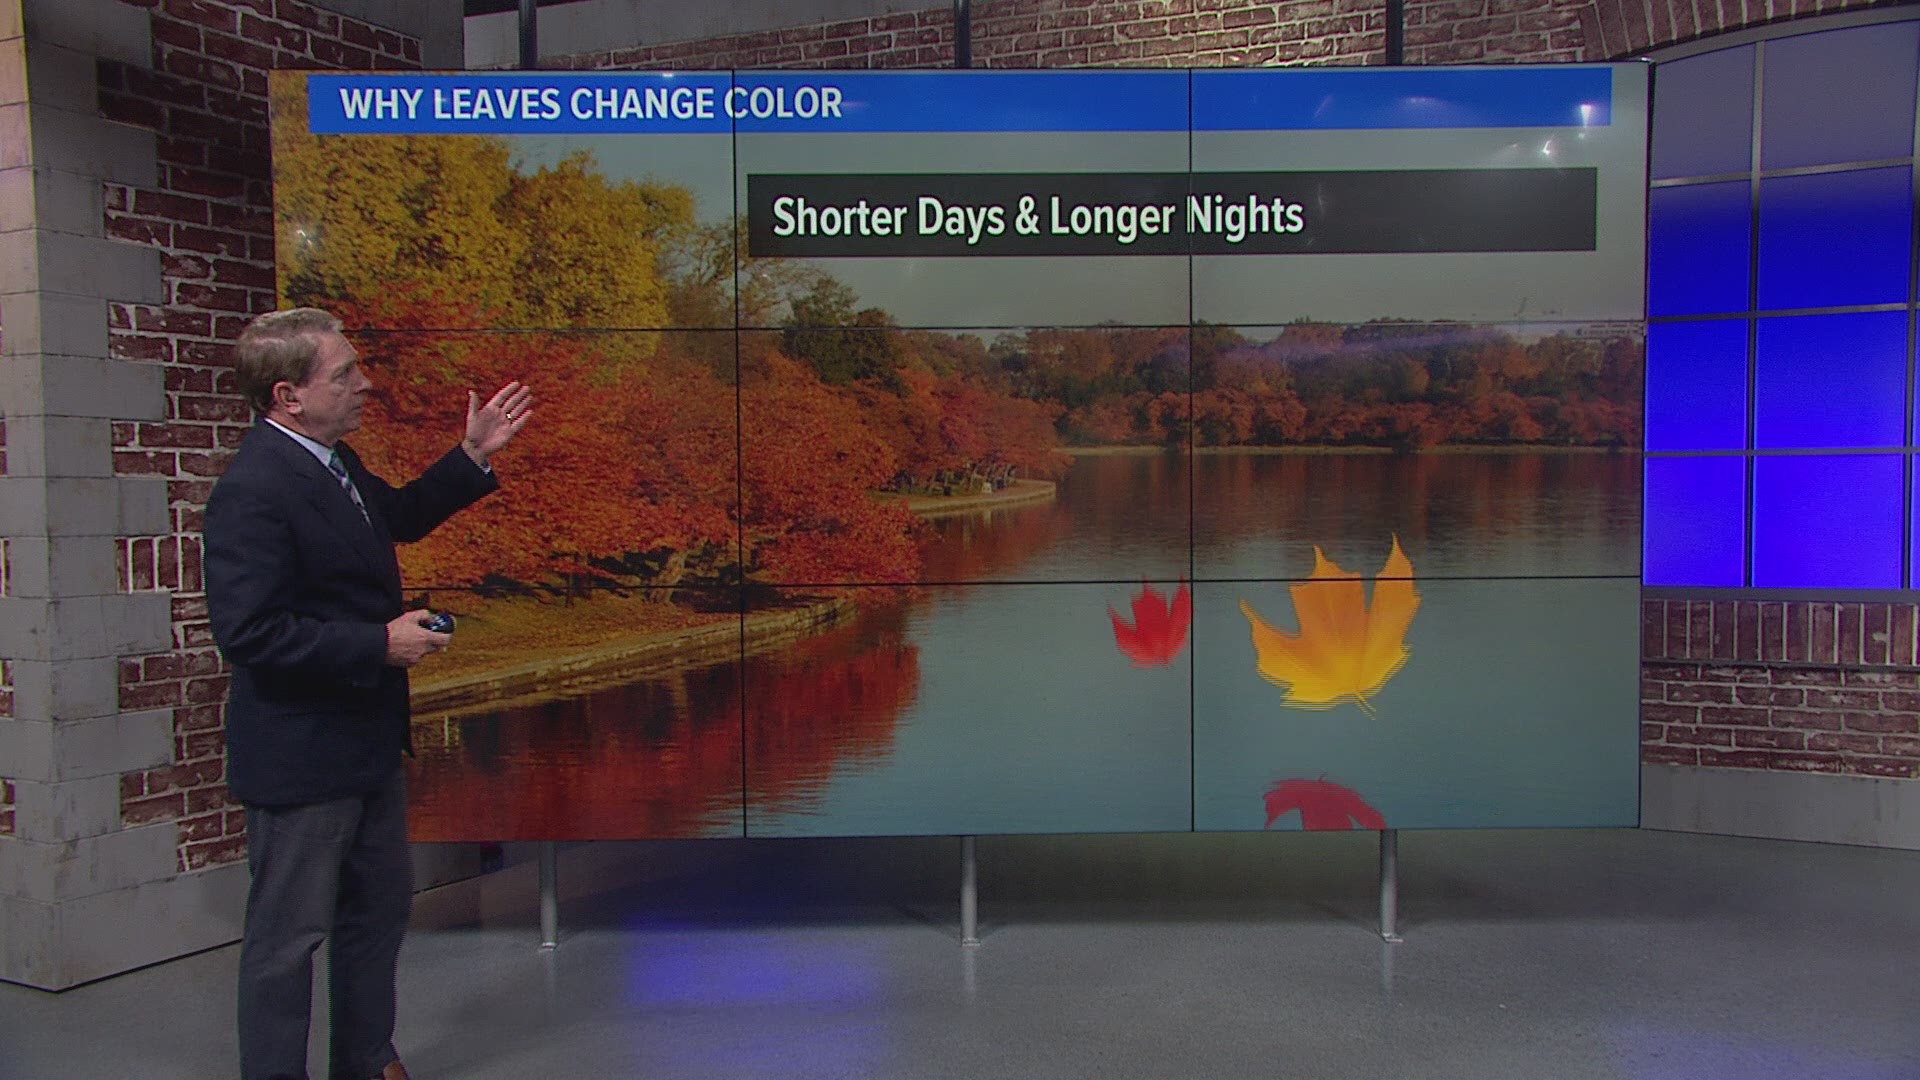 This year's fall foliage in DC metro could end up less vibrant because of a recent lack of rainfall.